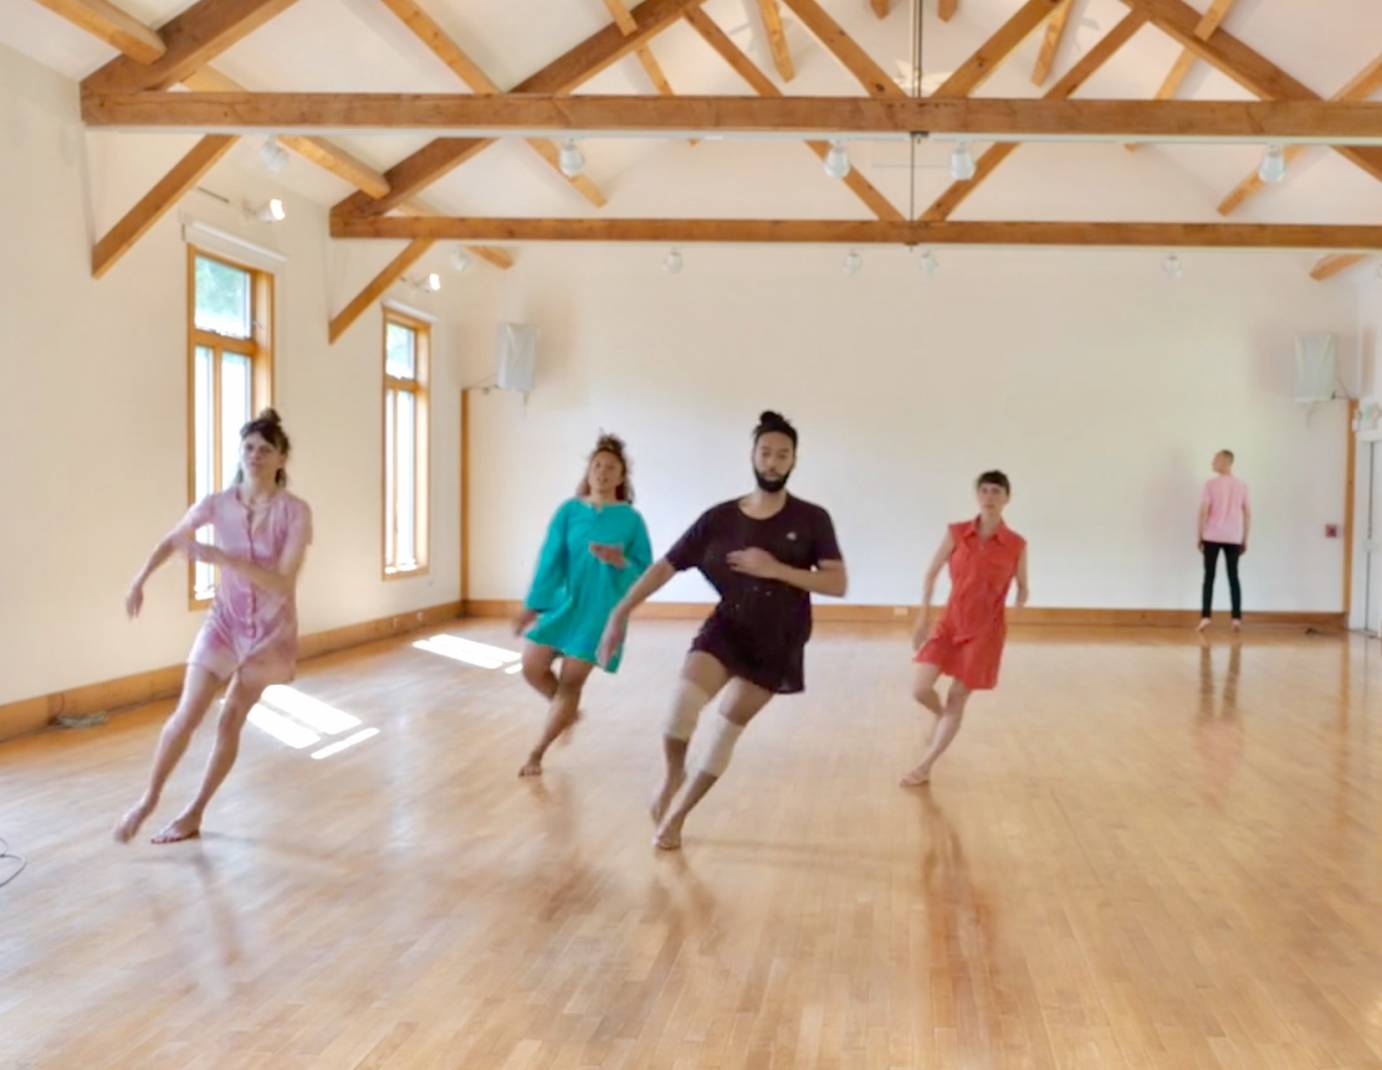 4 dancers wearing colorful and short outfits dance in a white-walled room with a light colored wood floor , one person in a pink top with black pants stands in the background 